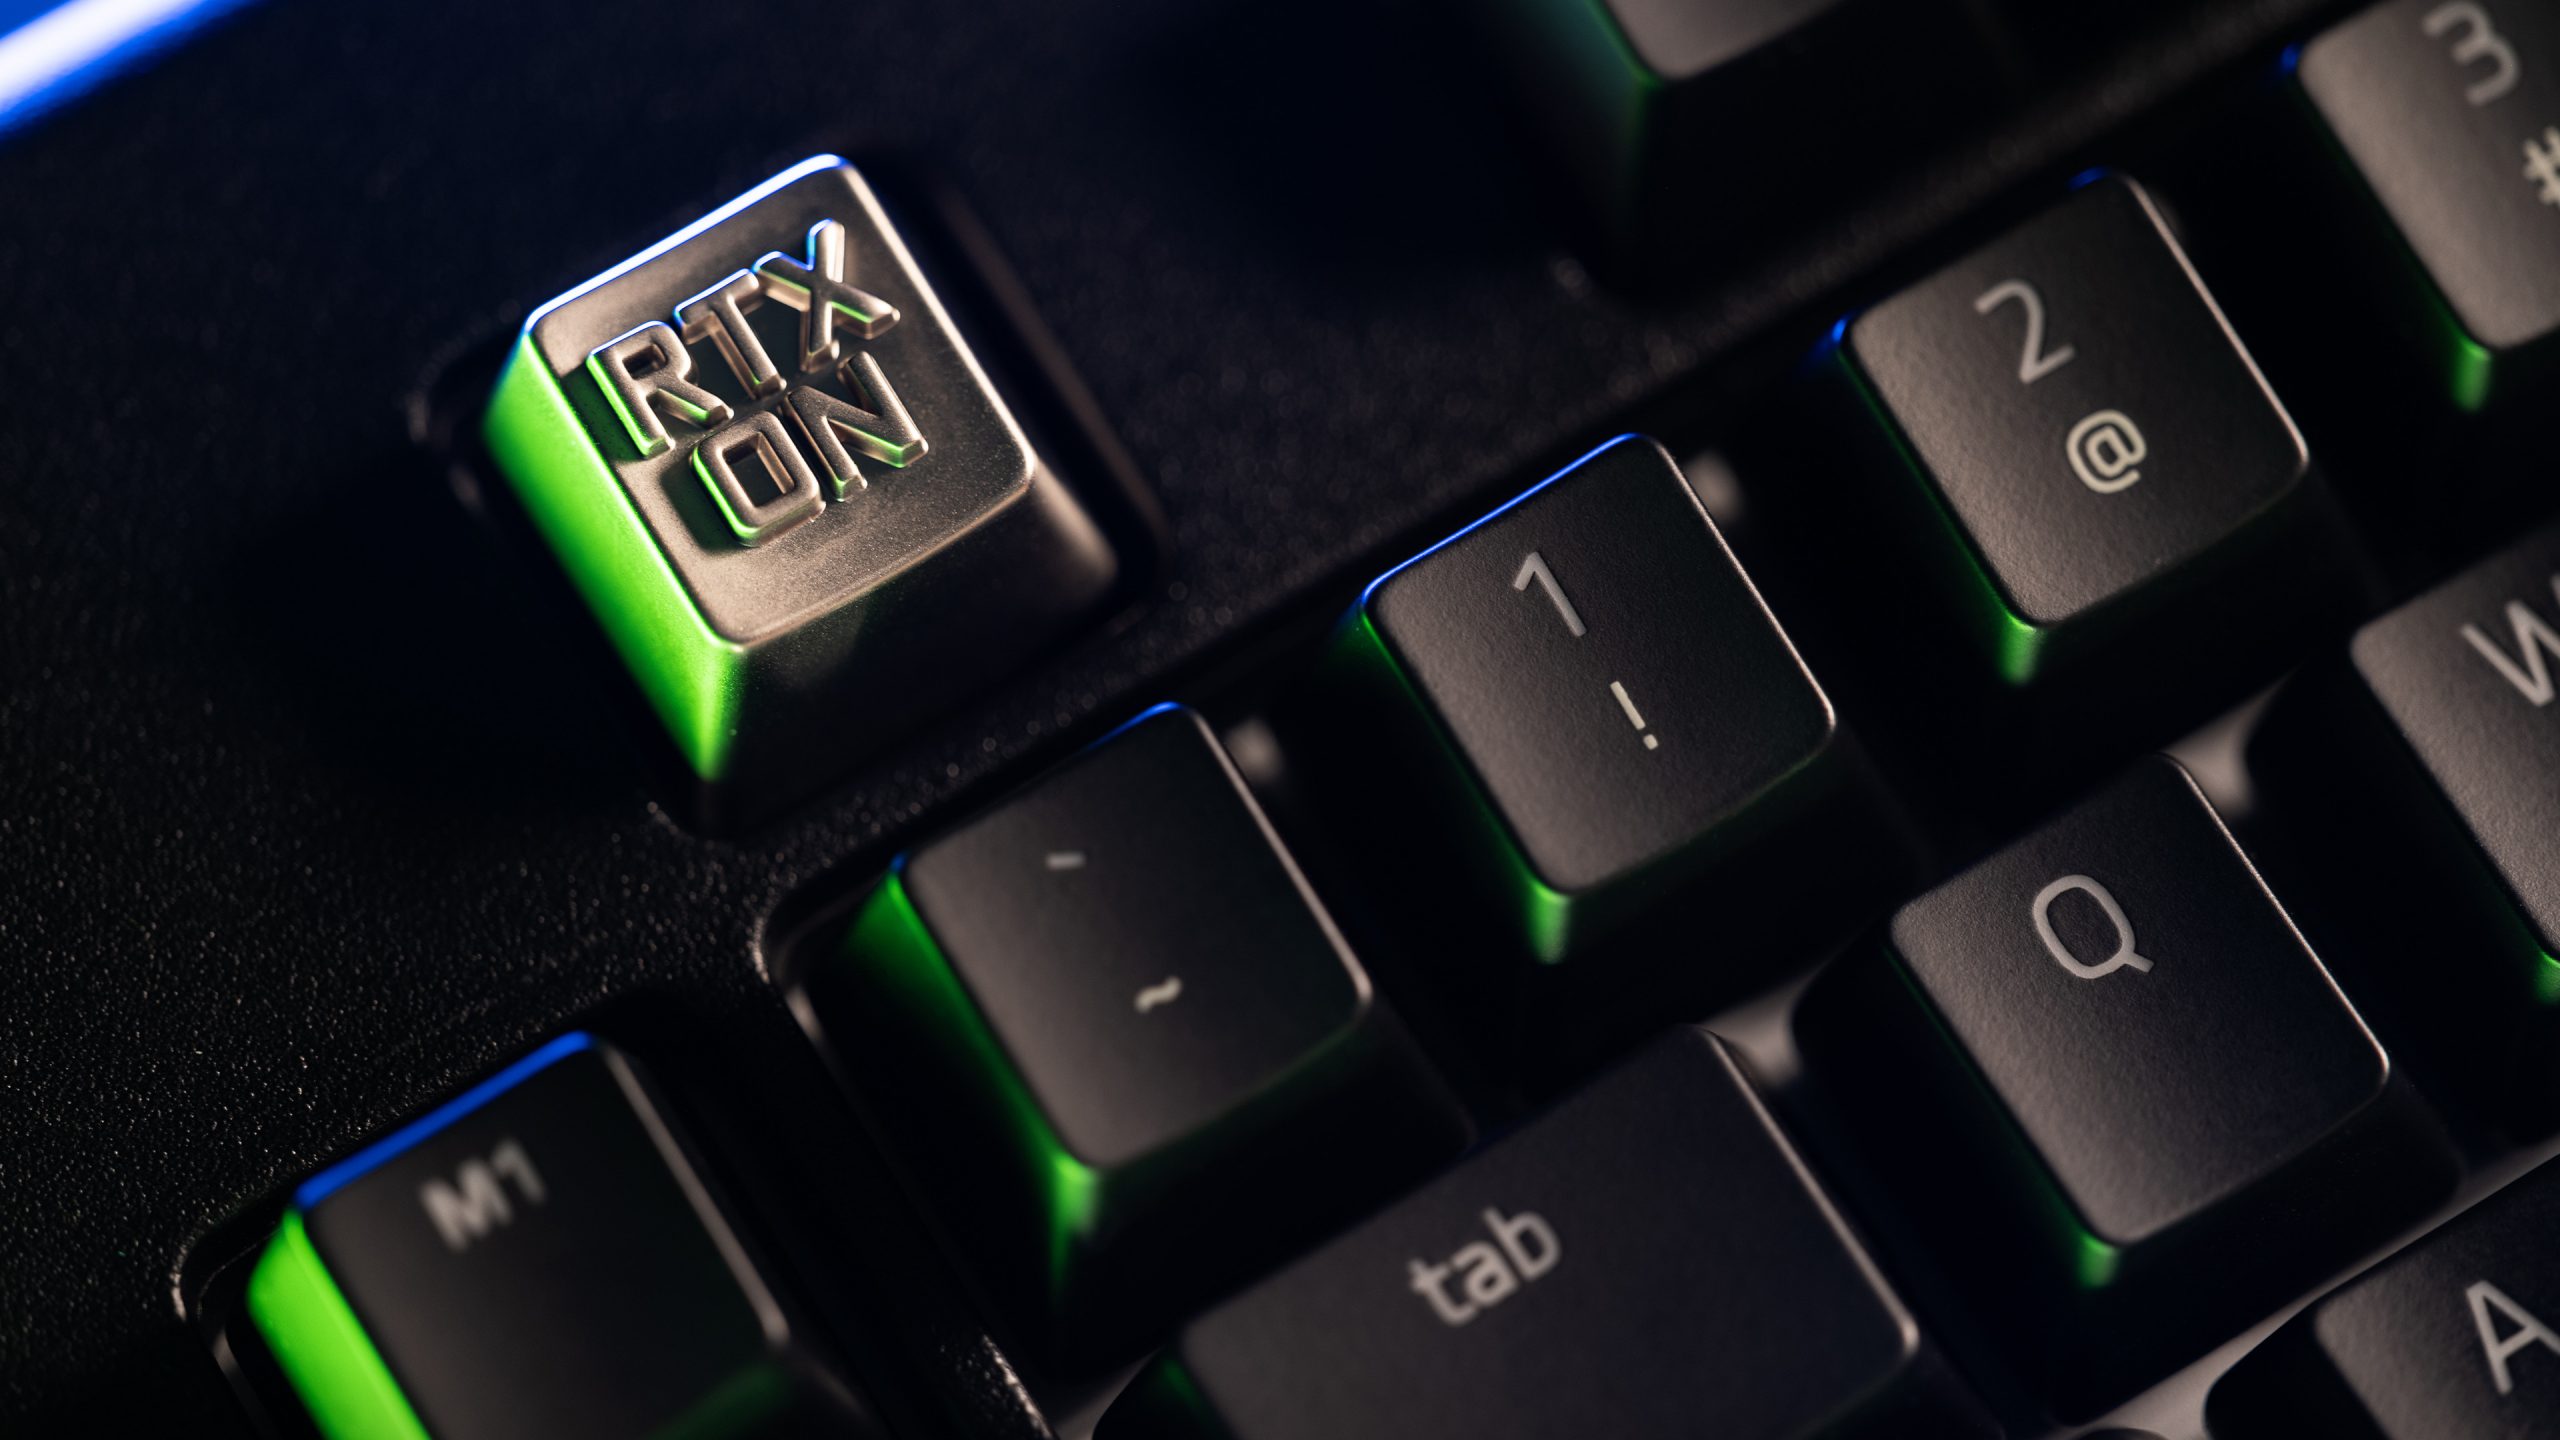 Nvidia’s Rtx Graphics Cards Are Joined By An Rtx… Keycap?